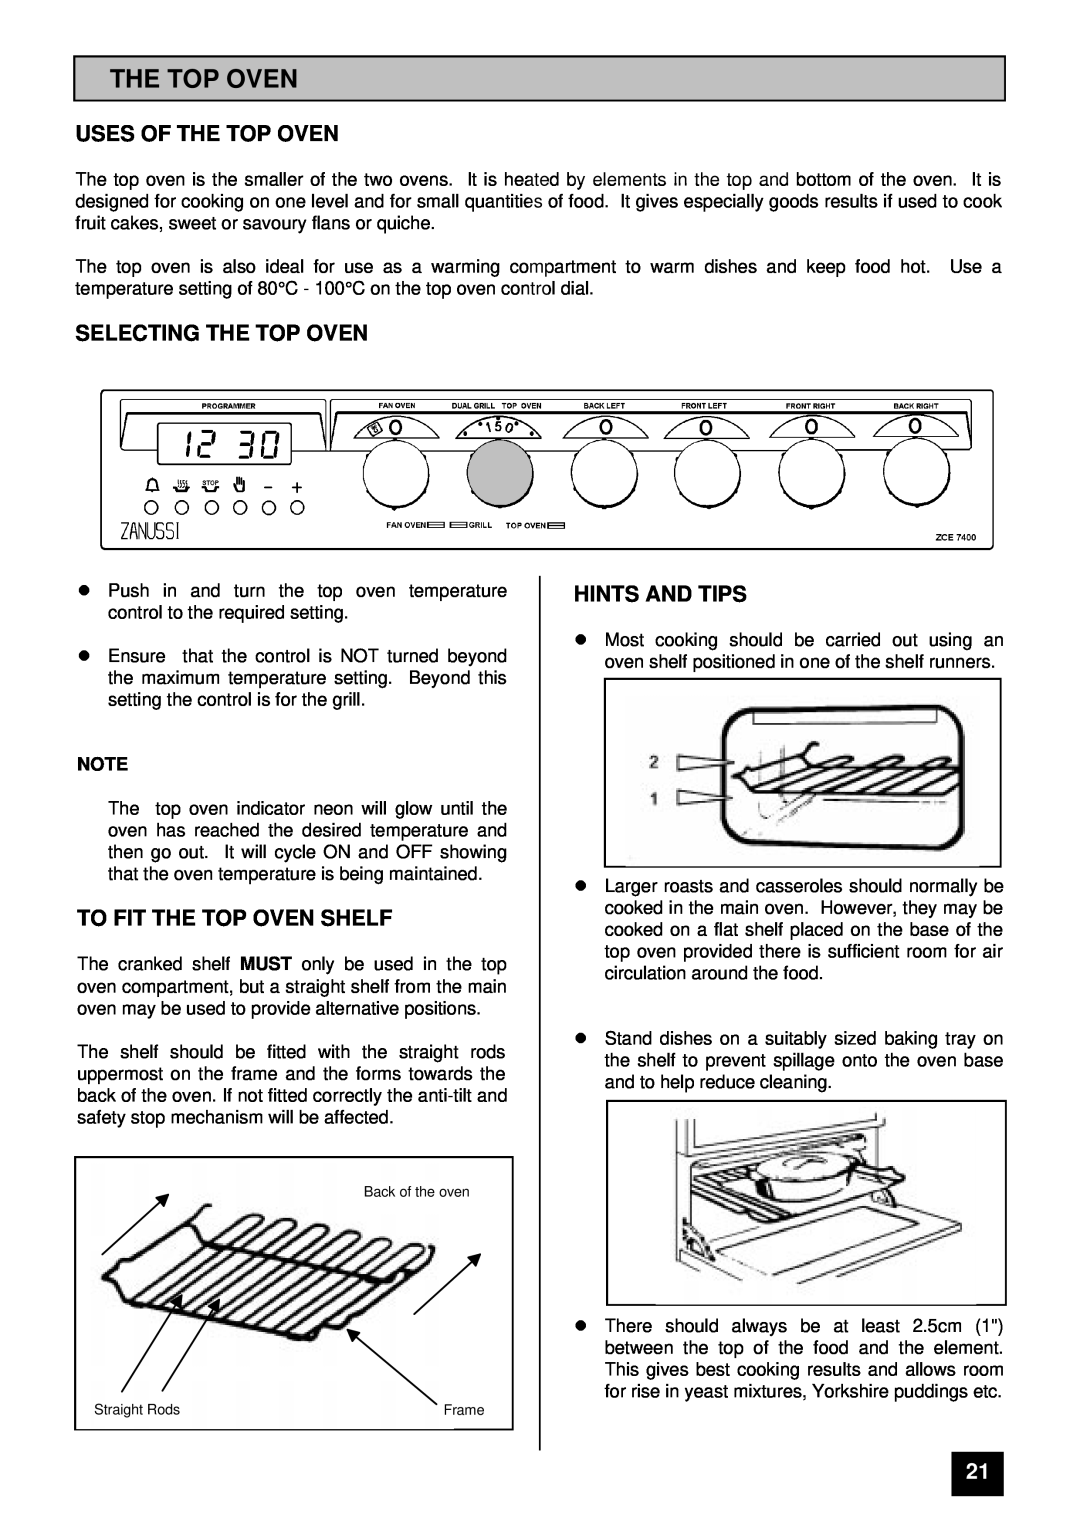 Zanussi ZCE 7400 manual Uses Of The Top Oven, Selecting The Top Oven, To Fit The Top Oven Shelf, lHINTS AND TIPS 